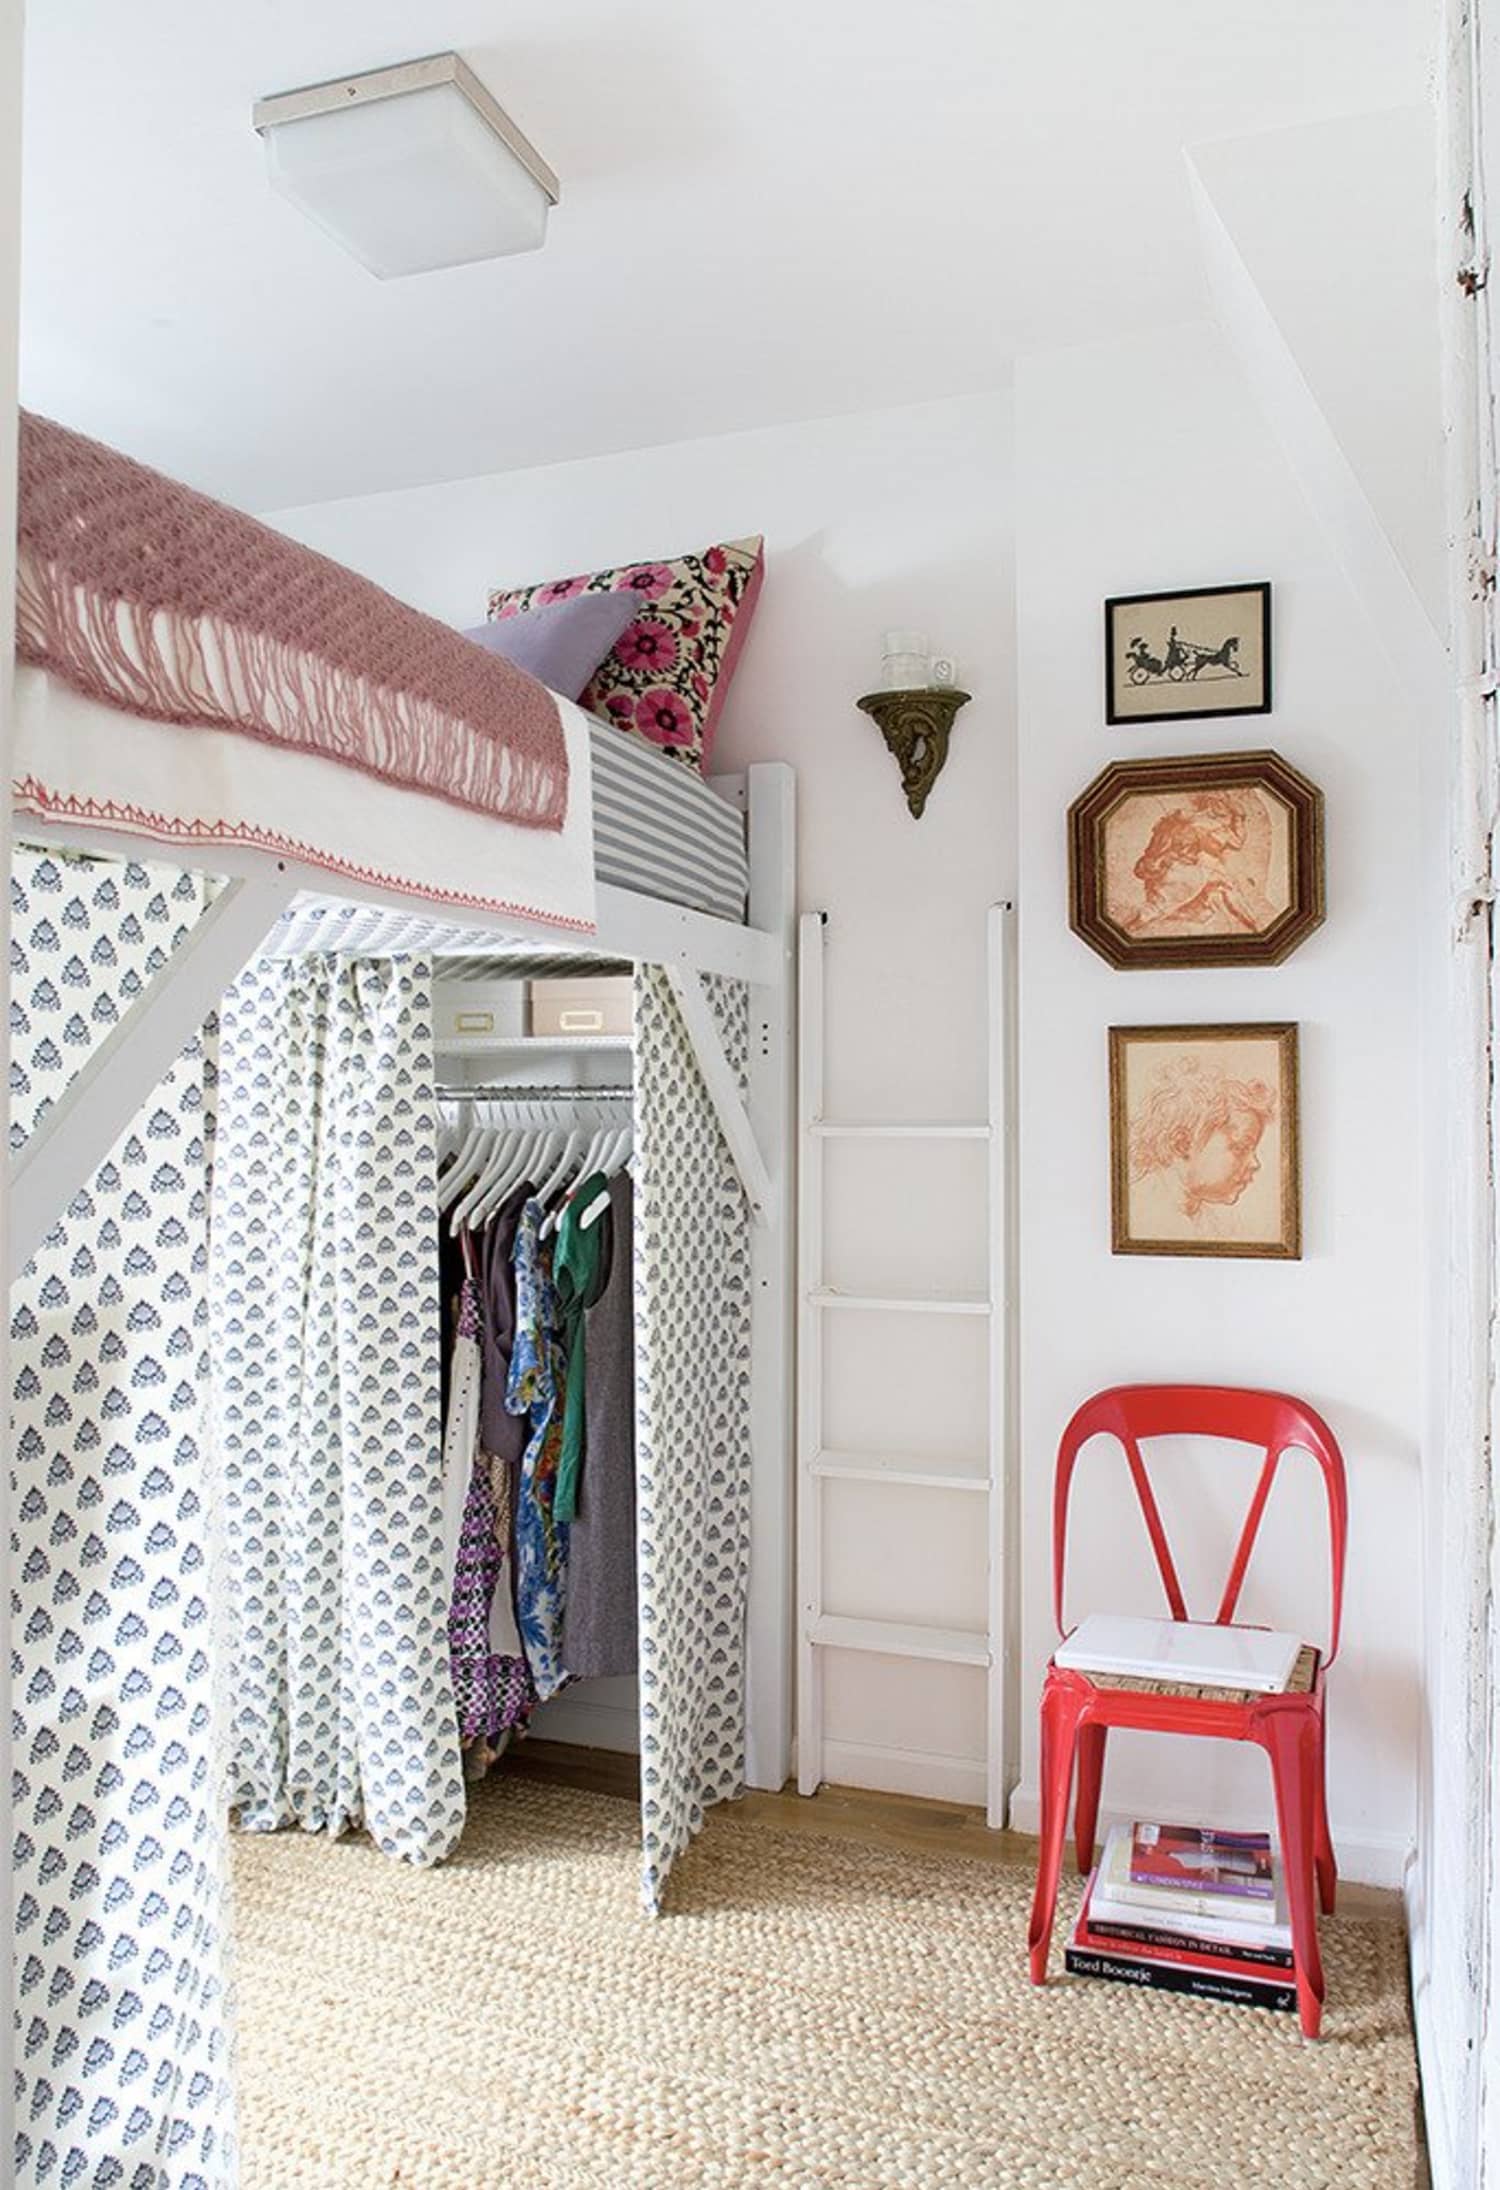 loft bed with chair underneath